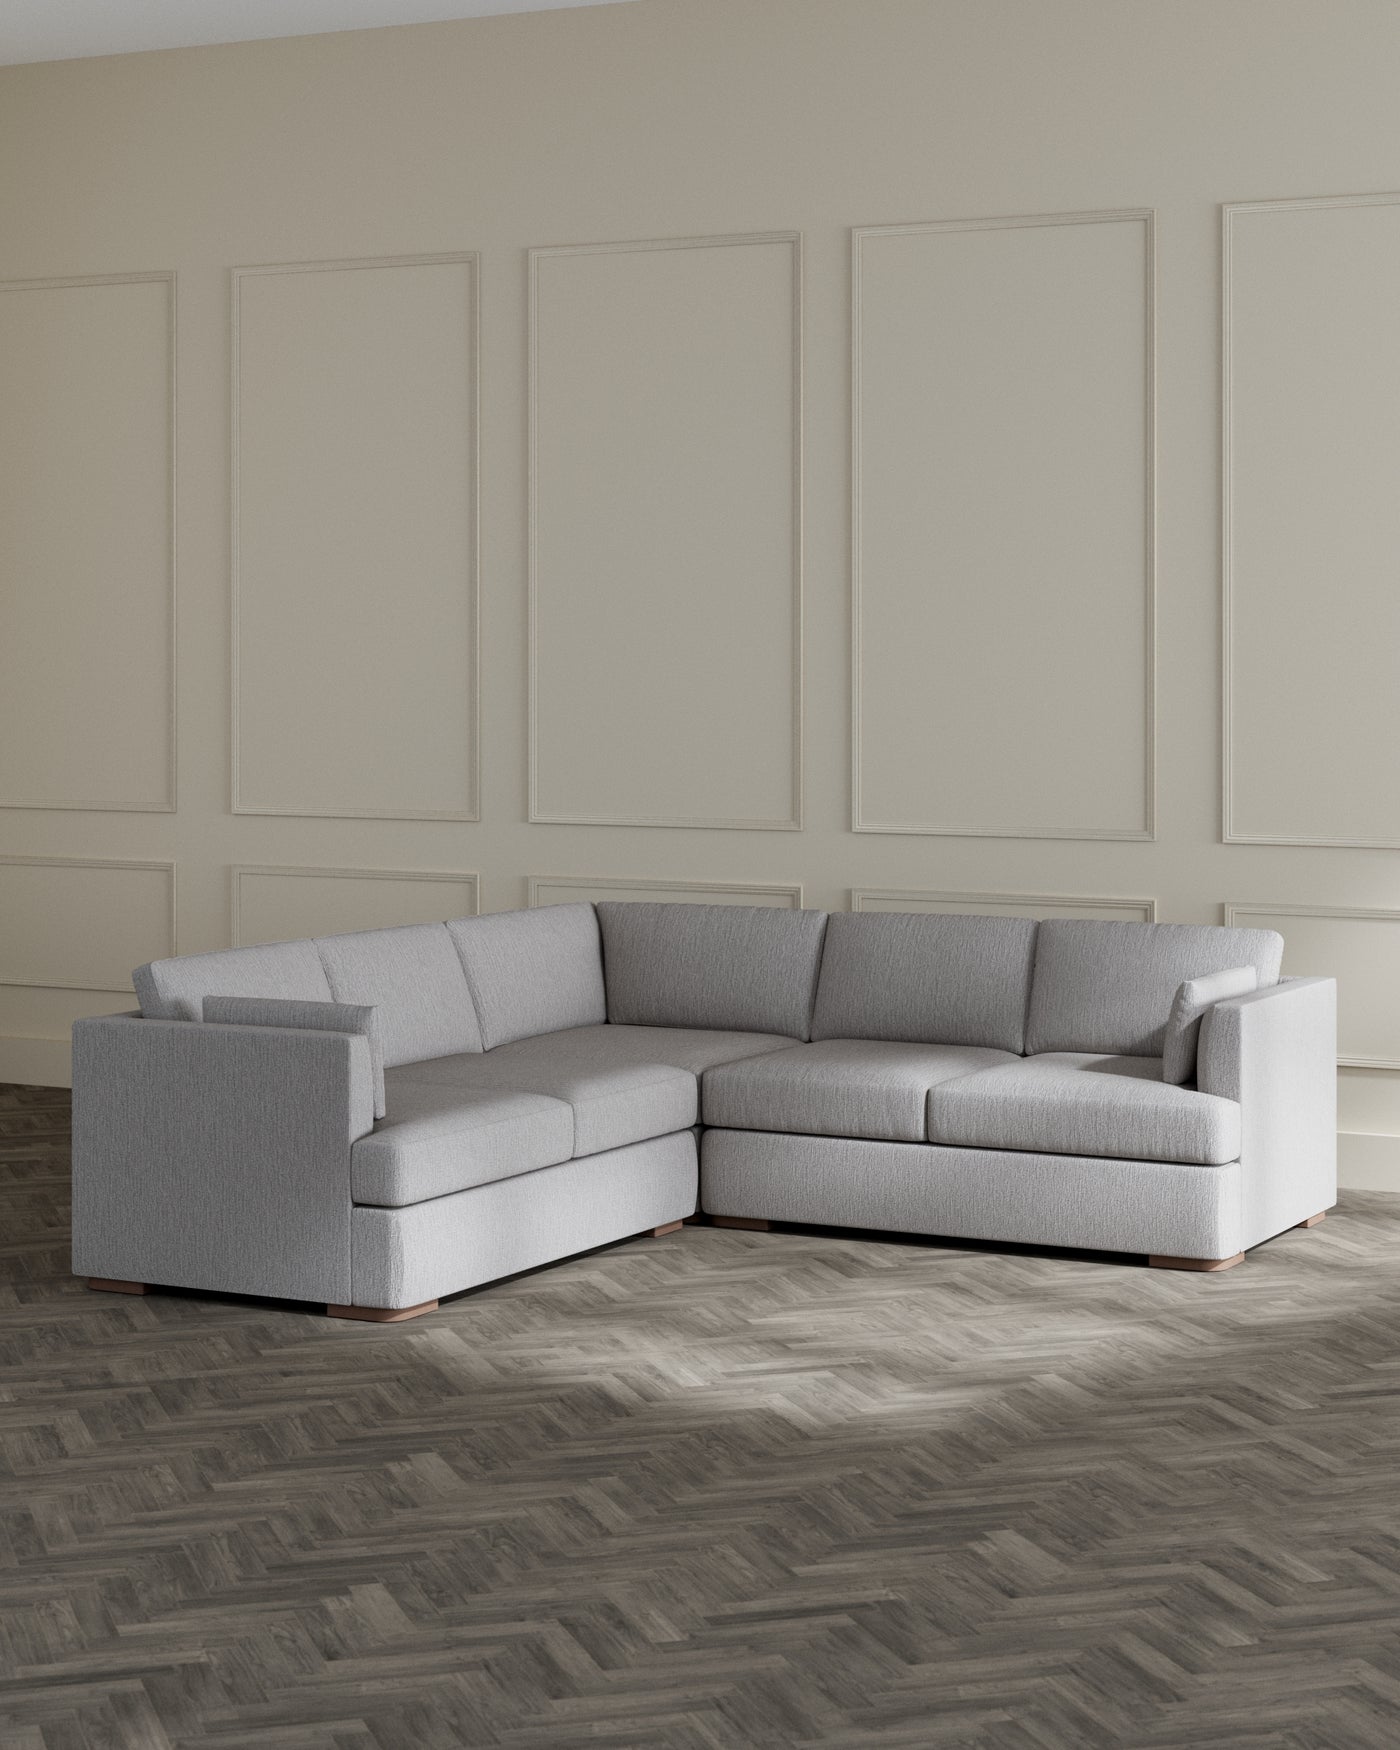 Modern light grey sectional sofa with clean lines, featuring a chaise lounge on the left and a cushioned armrest on the right, set on a dark herringbone-patterned floor in a room with panelled walls.